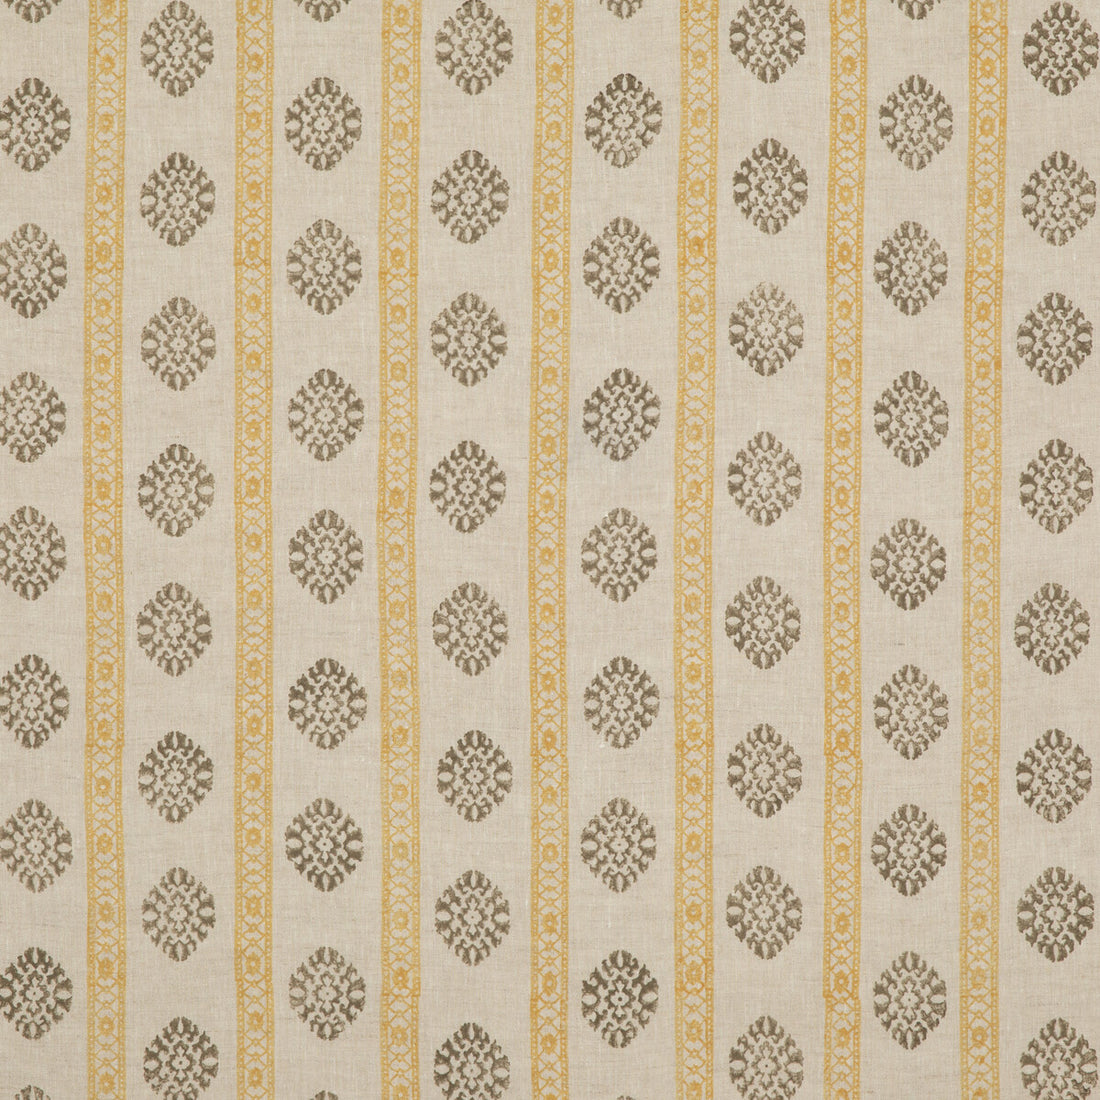 Alma fabric in ochre/mole color - pattern BP10821.3.0 - by G P &amp; J Baker in the Coromandel Small Prints collection